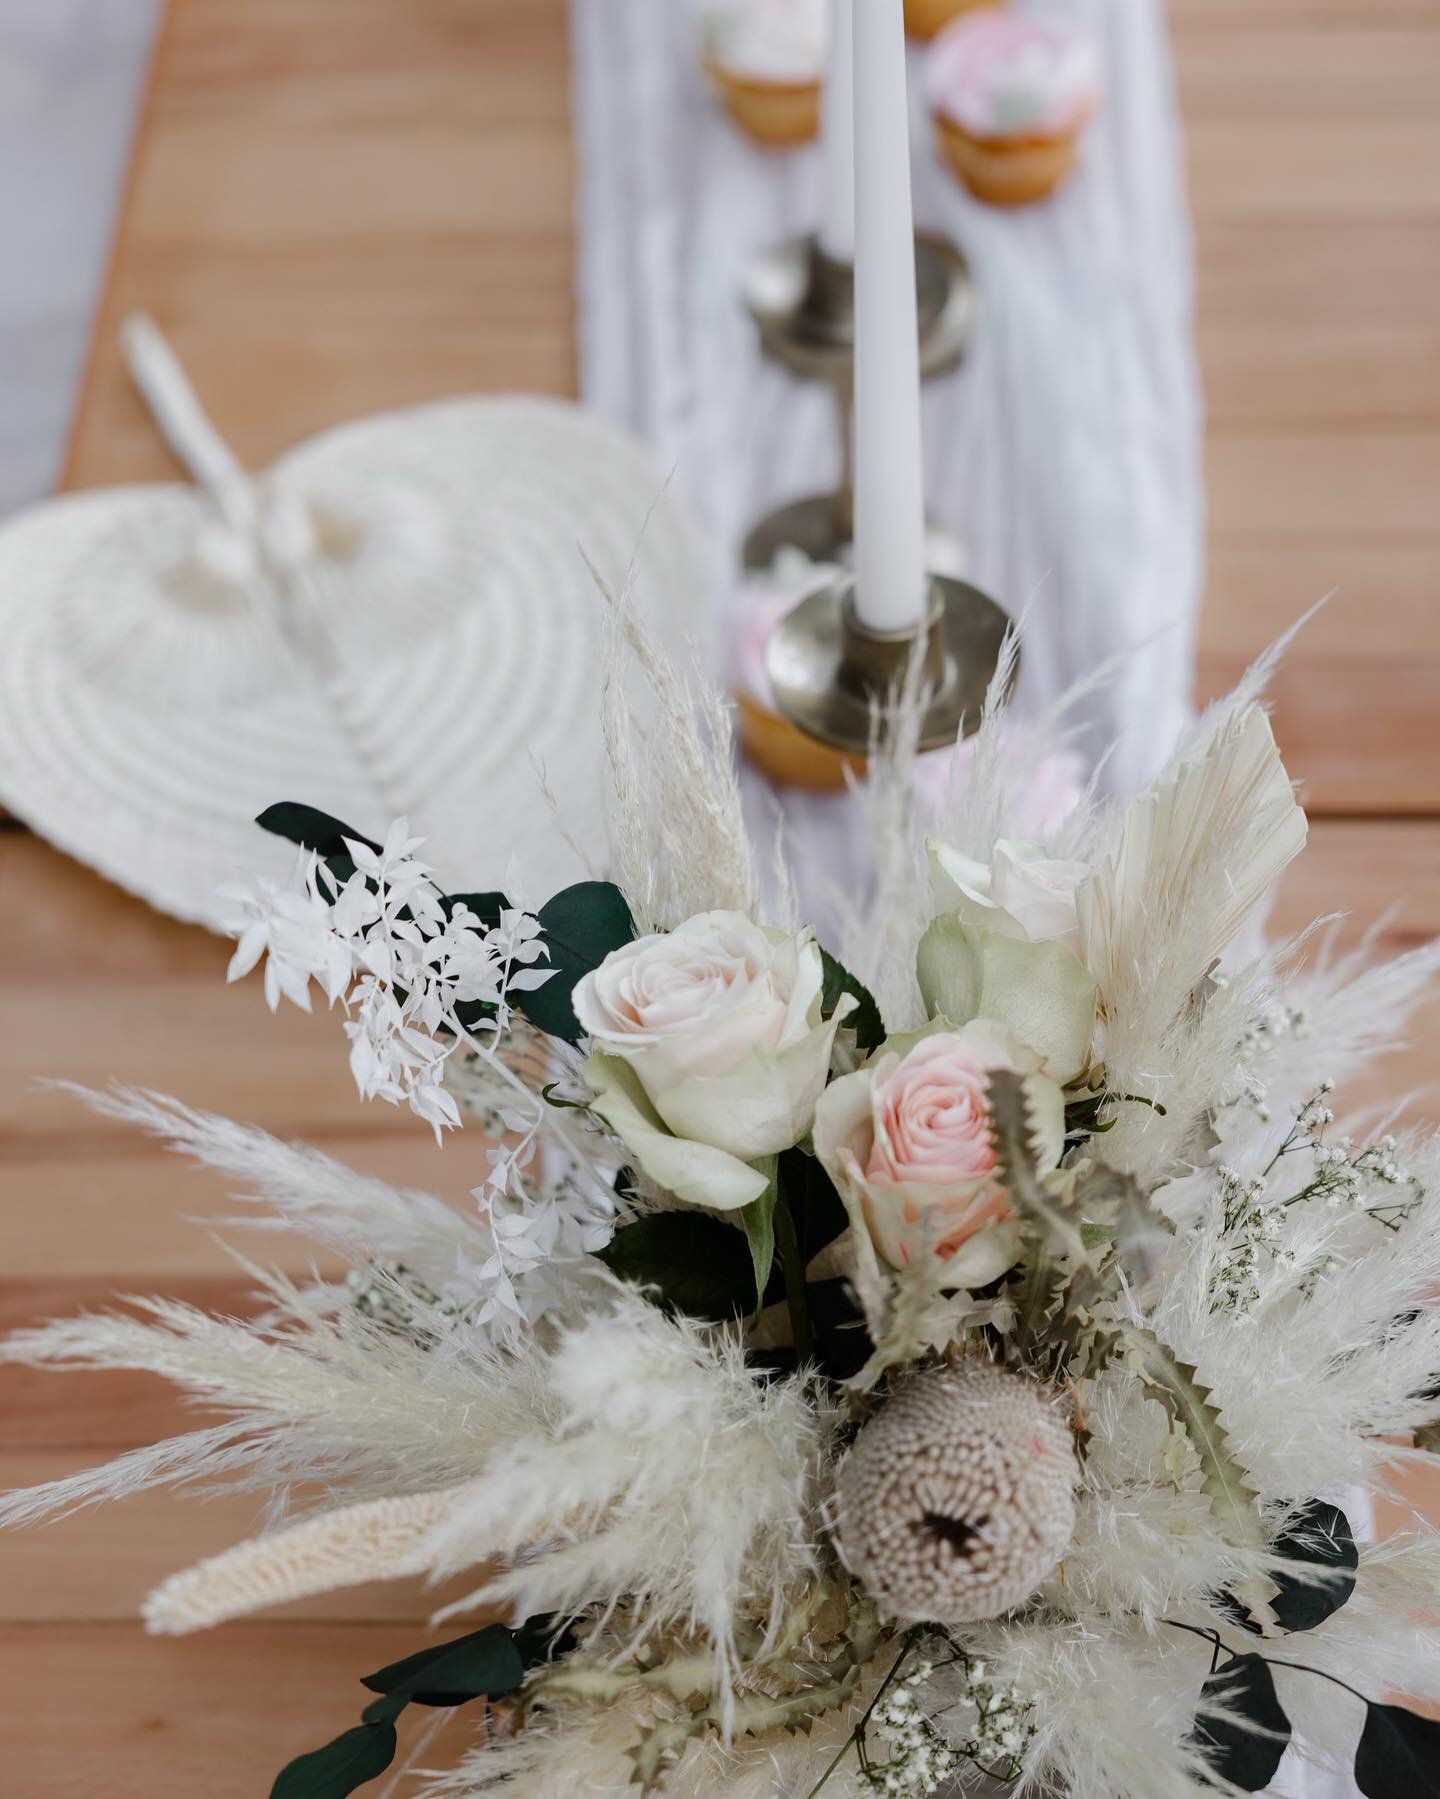 Once upon a time &hellip;.. 🌾🤍

We have officially launched our Boho Rental Collection. Now offering photo installations and dried floral centerpieces and event decor.

Book now ! Bbarfresh.com
 

#driedflowers #bohodecor #rentme #bohomiami #bloomb